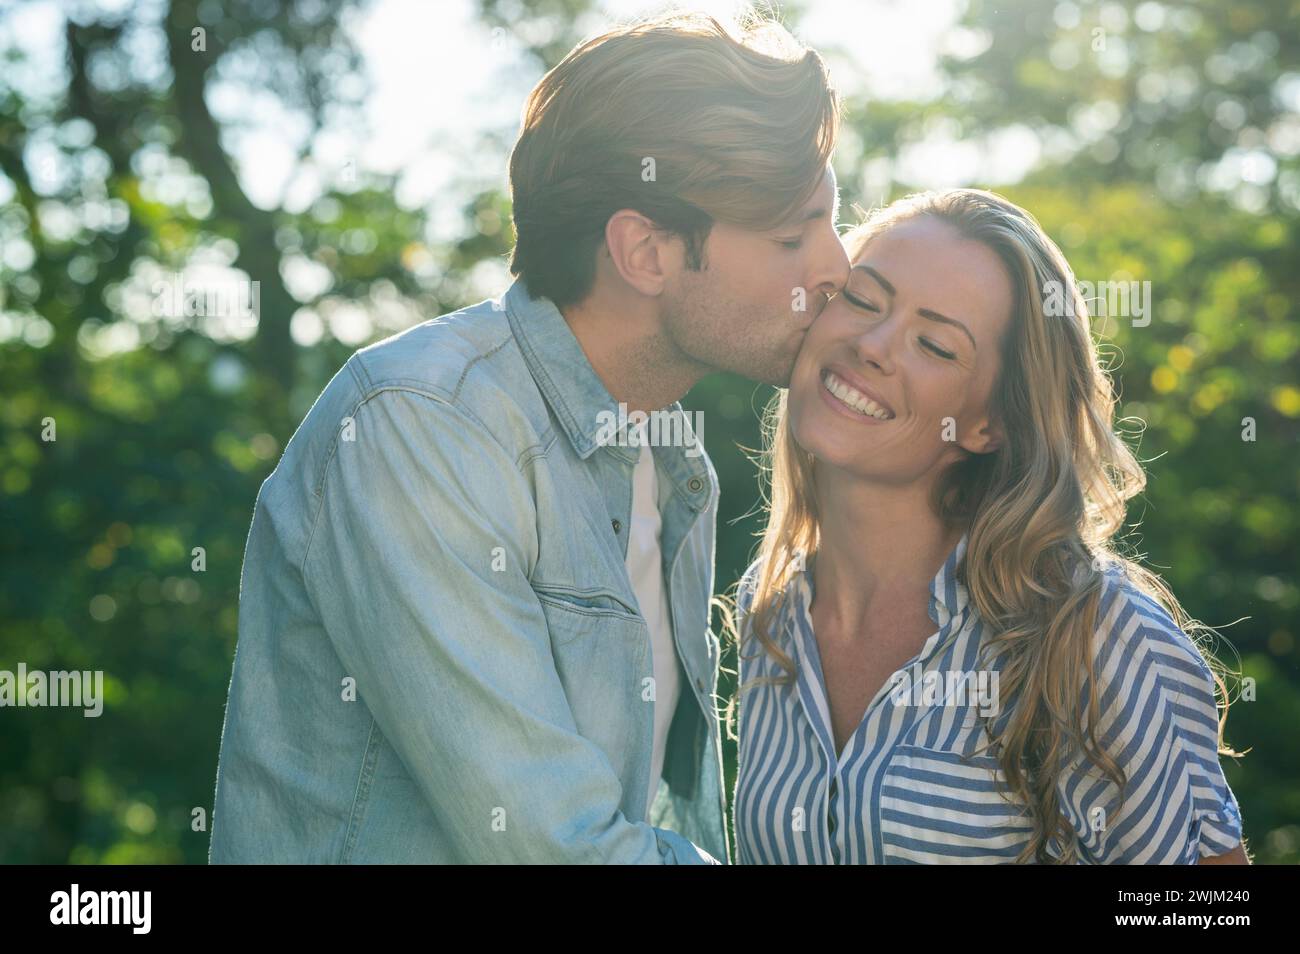 Adult man kissing girlfriend on the cheek while standing outdoors Stock Photo